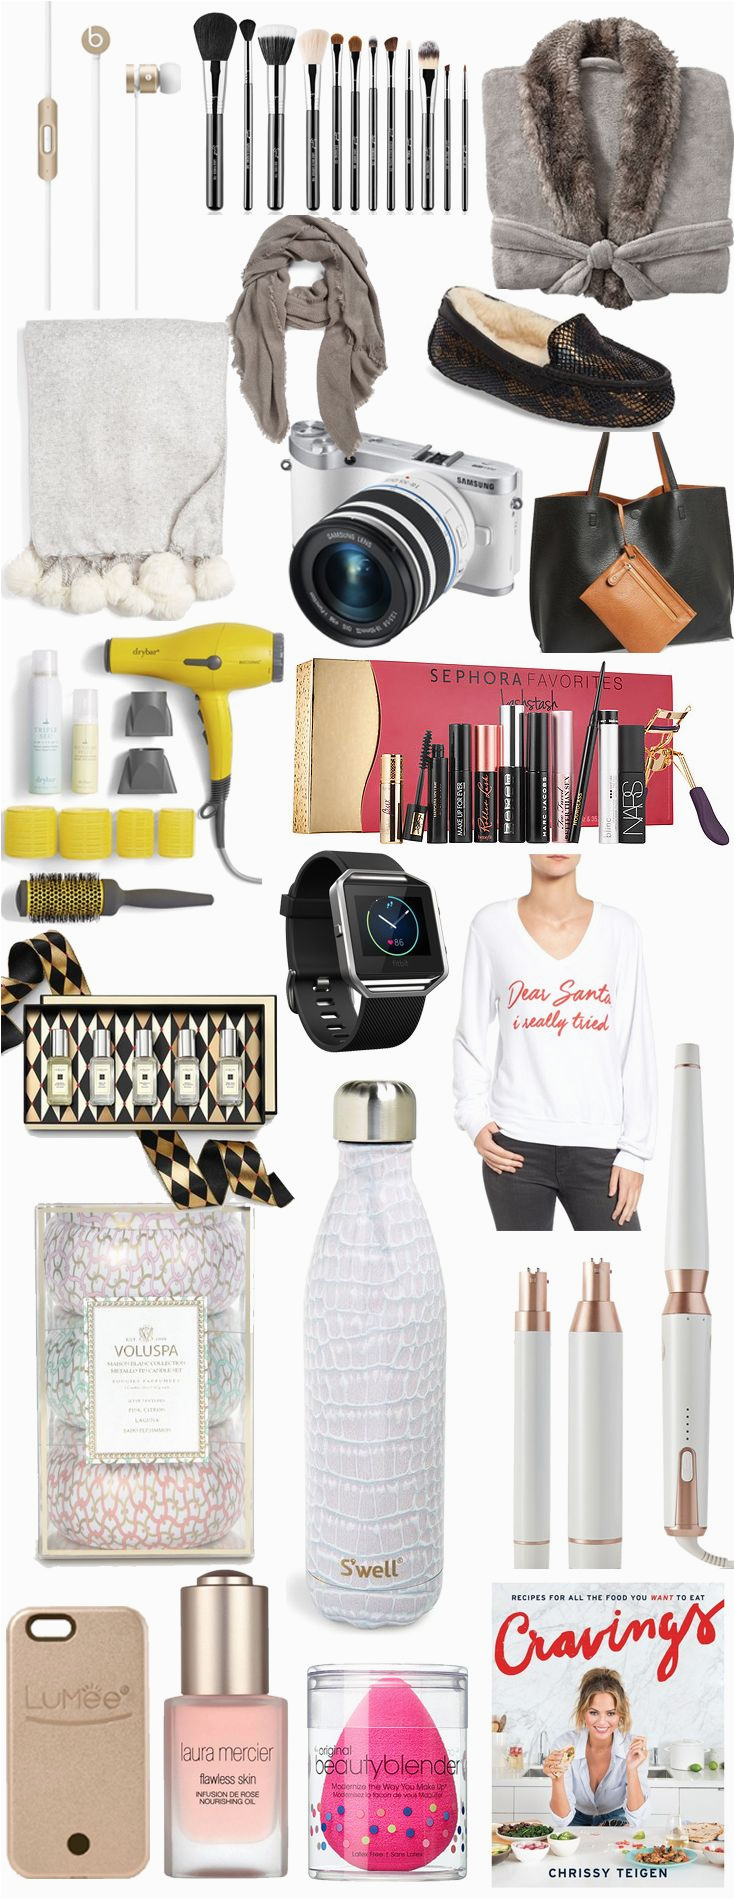 best 25 birthday gifts for her ideas on pinterest gifts